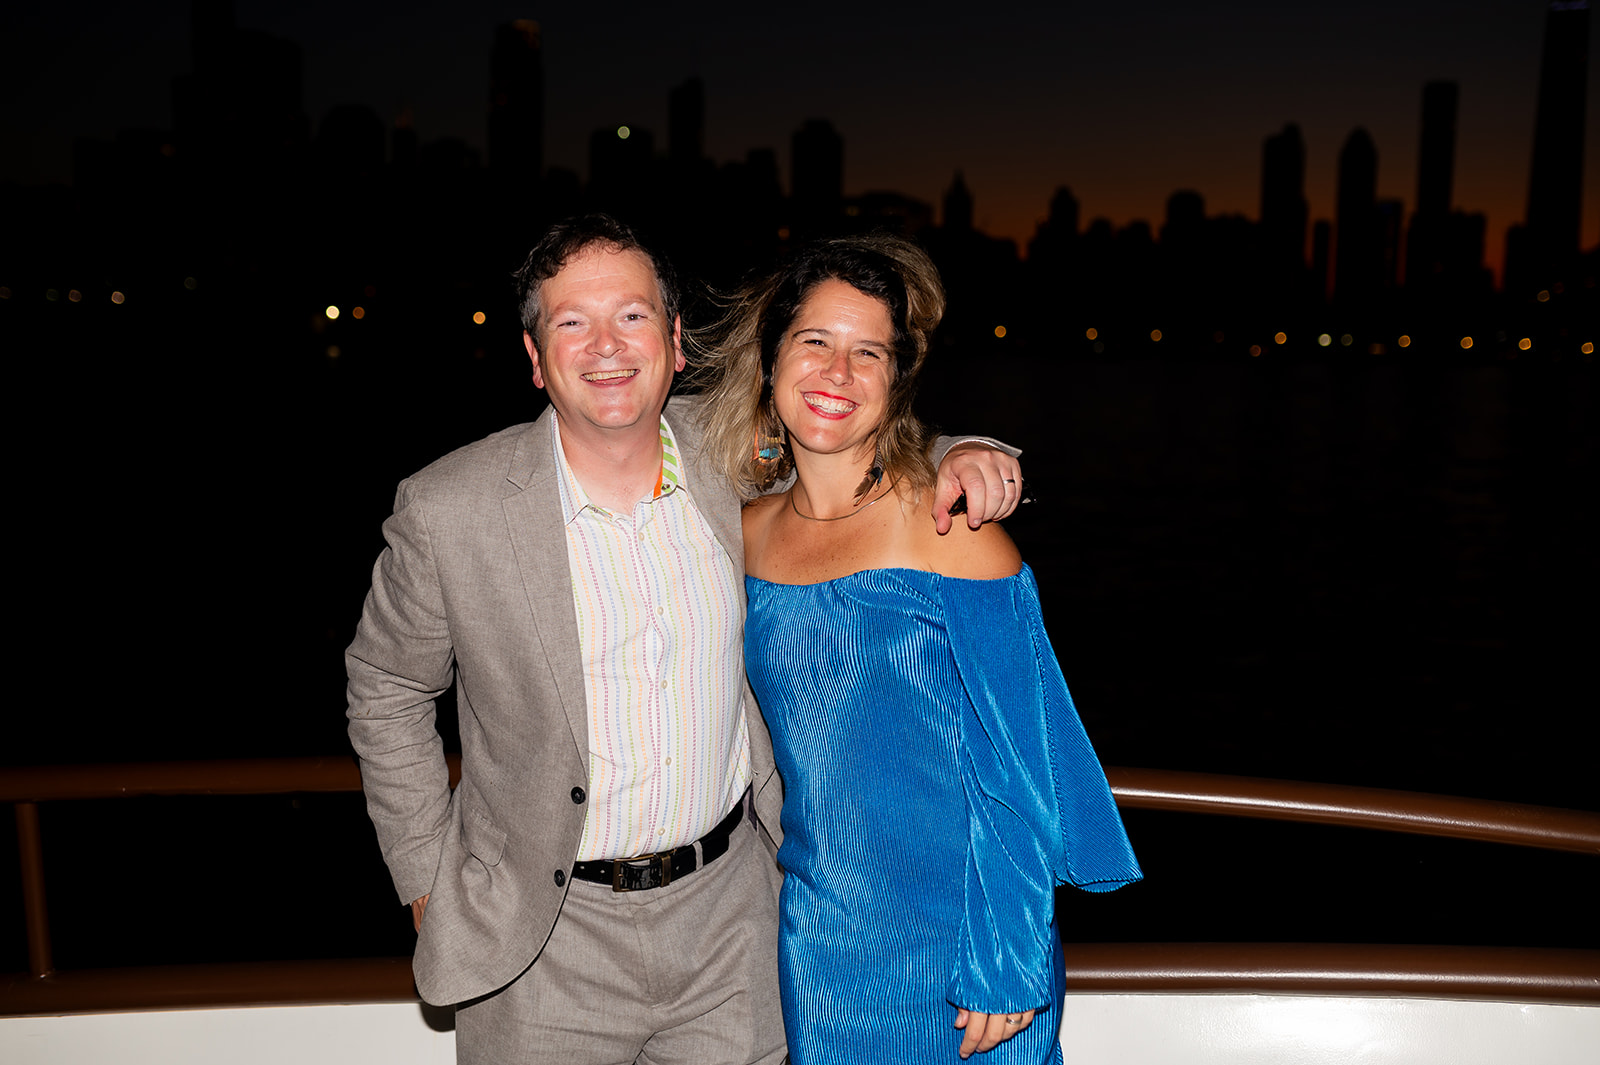 Chicago yacht party photographer